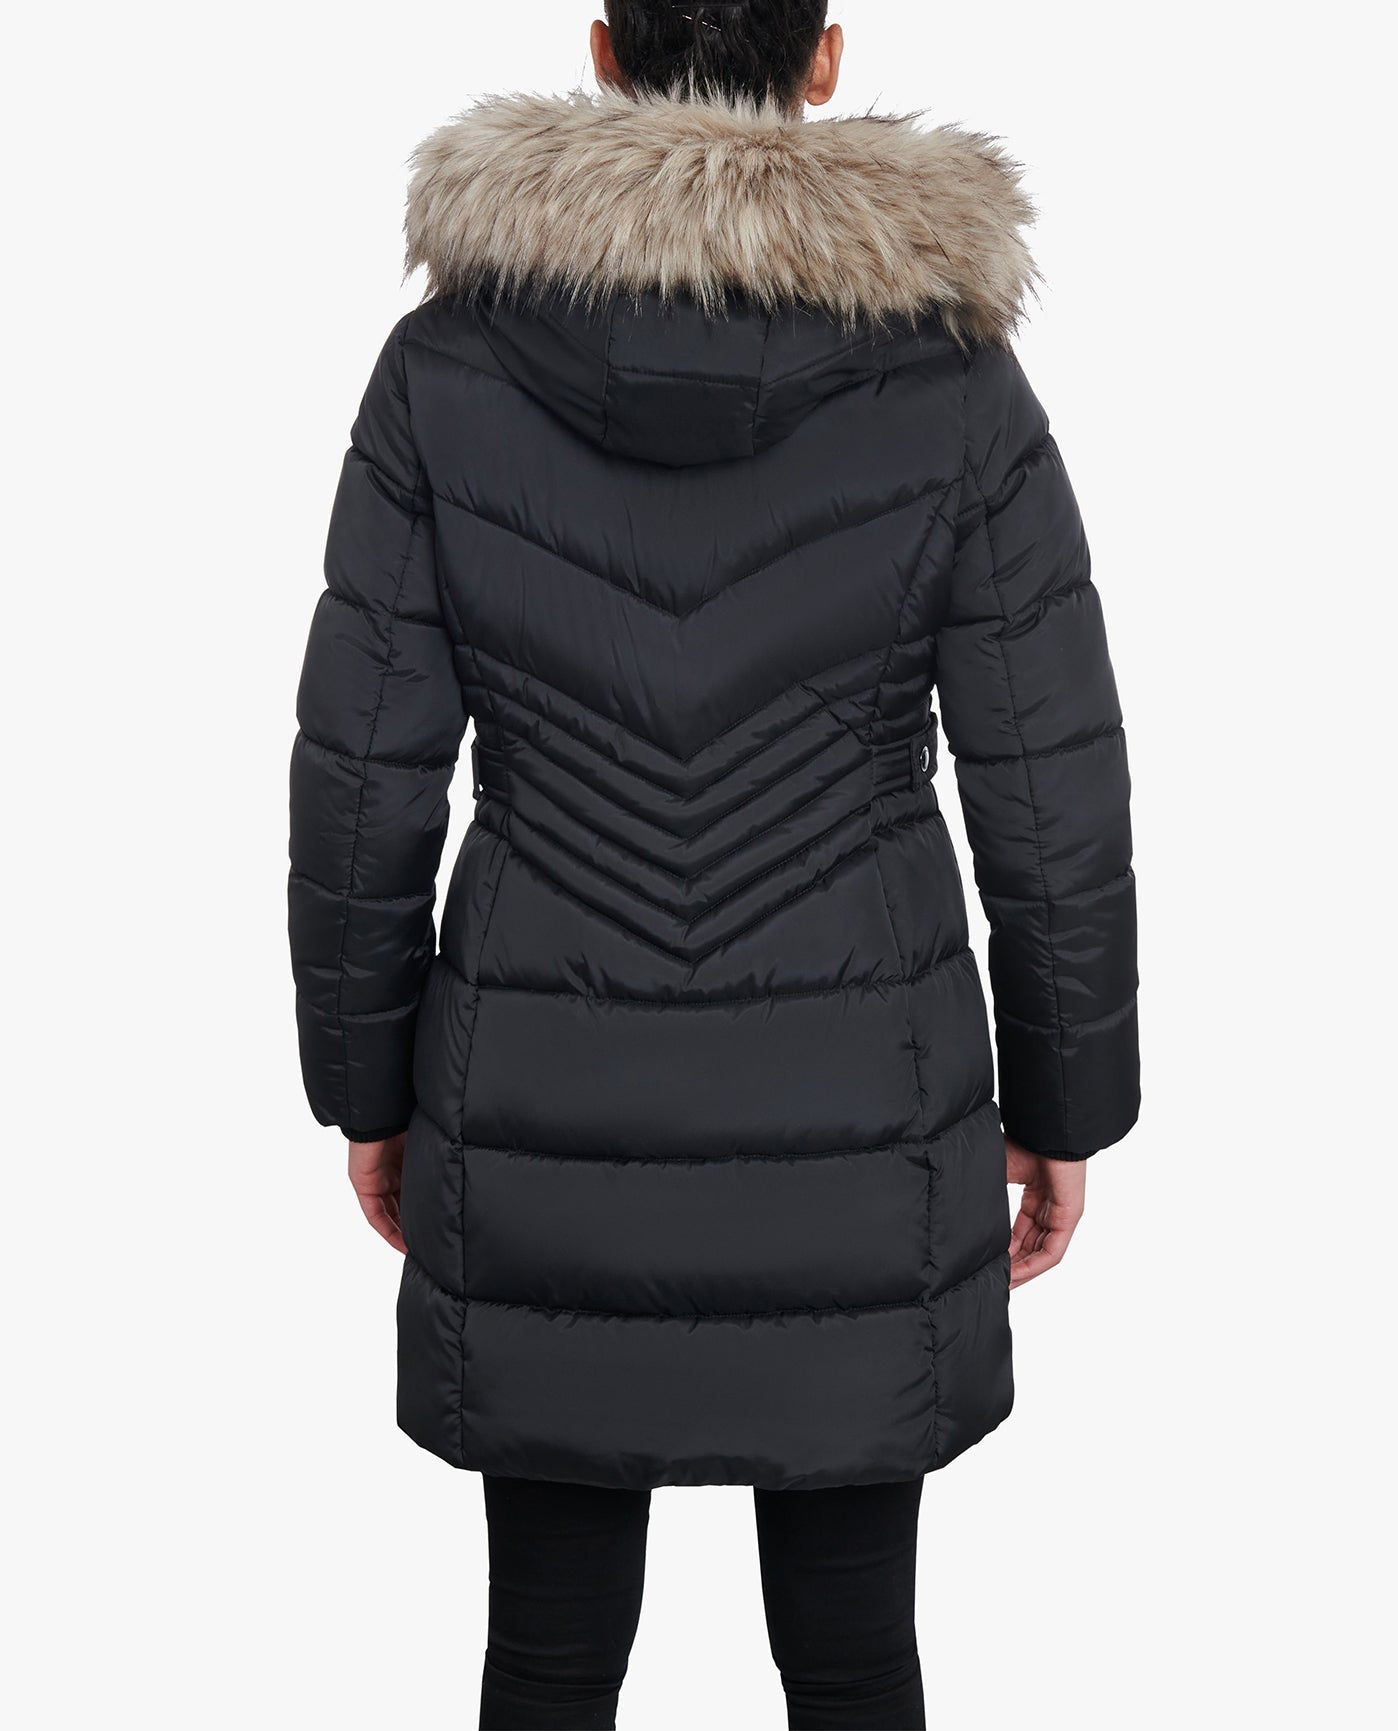 BACK VIEW OF ZIP-FRONT LONG LENGTH PUFFER JACKET WITH ZIP-OFF FUR TRIM HOOD | BLACK